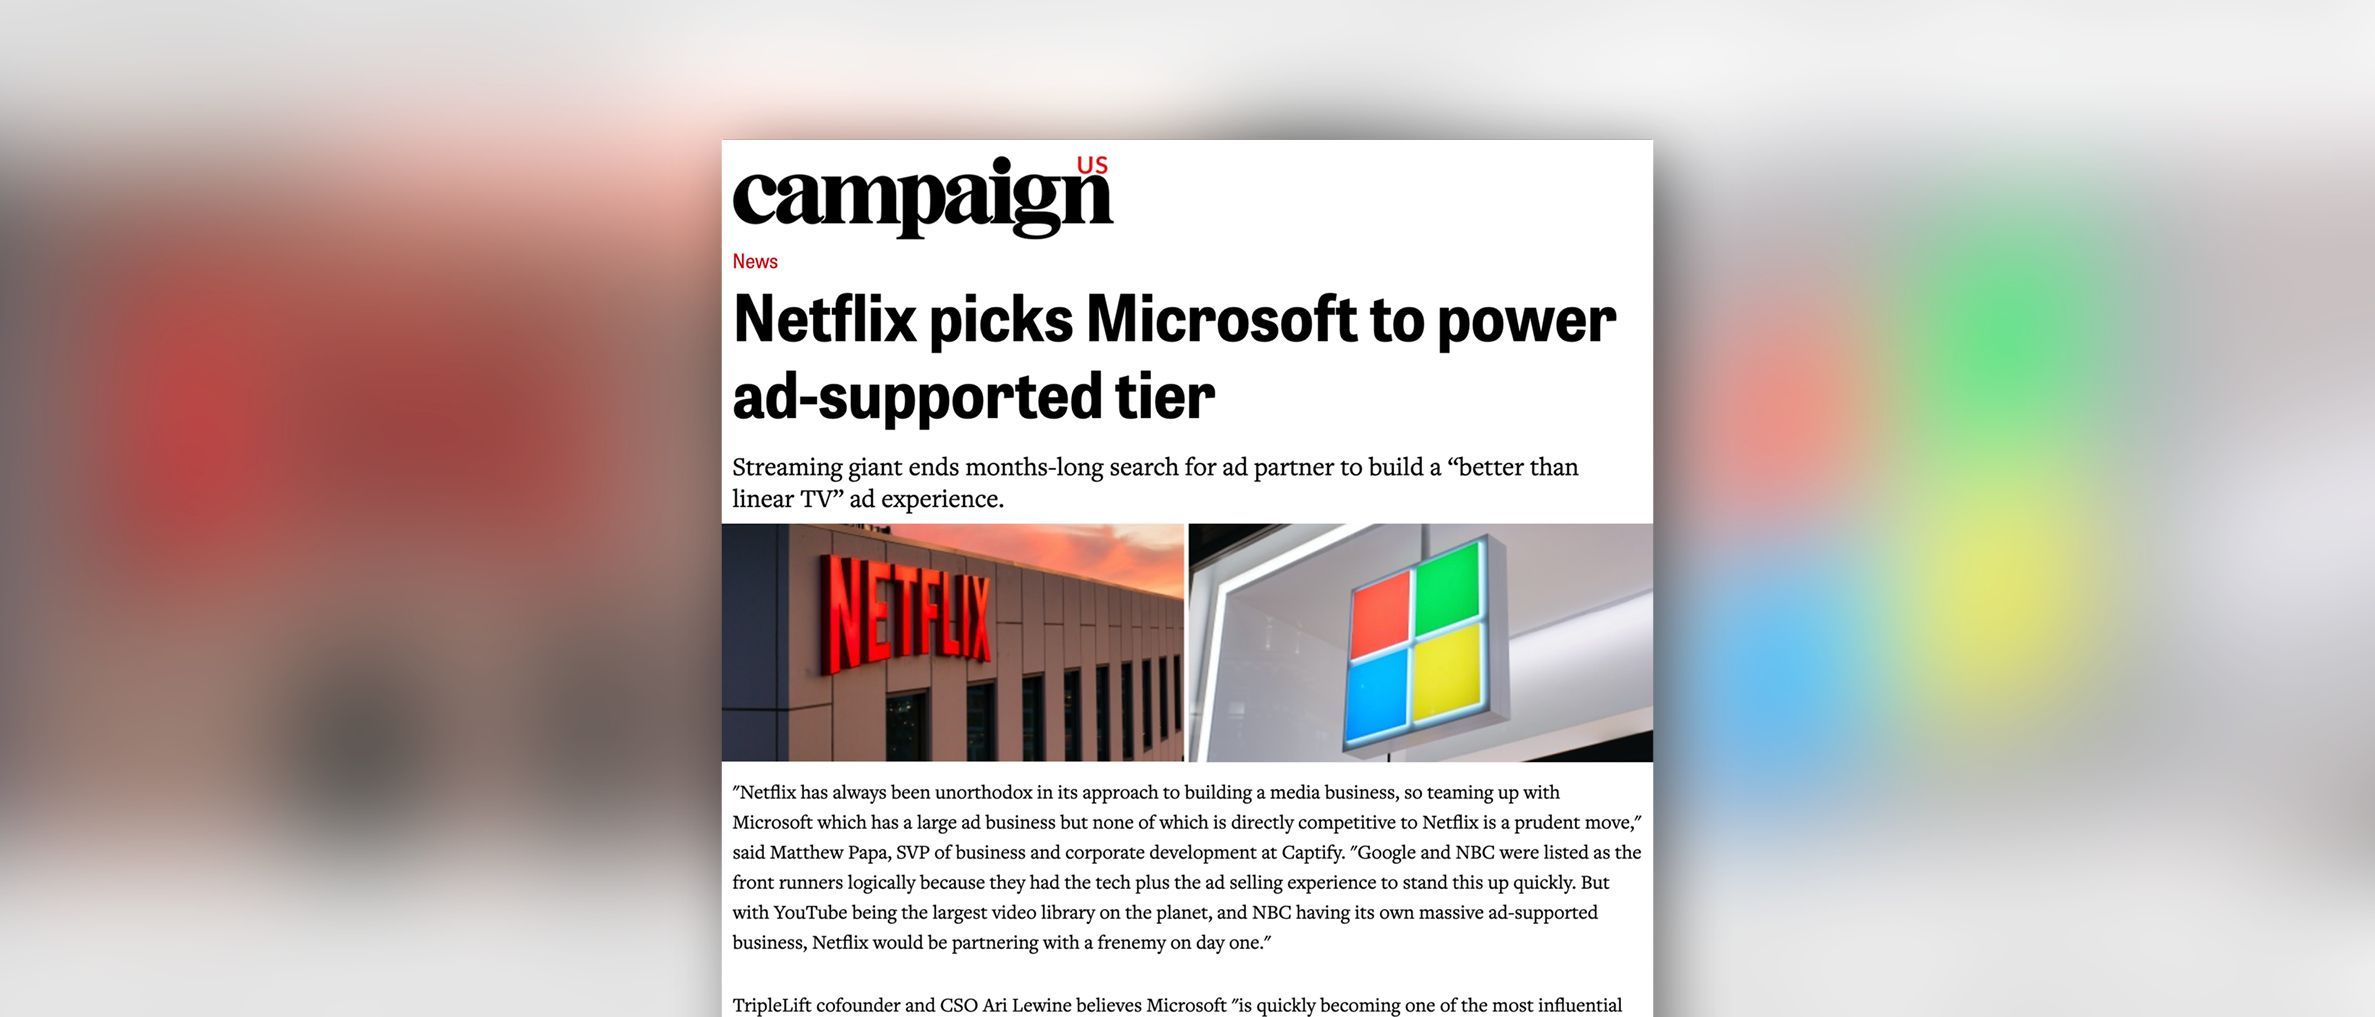 Campaign US: Captify’s Matthew Papa On The News That Netflix Has Chosen Microsoft To Power Its Ad-Supported Tier